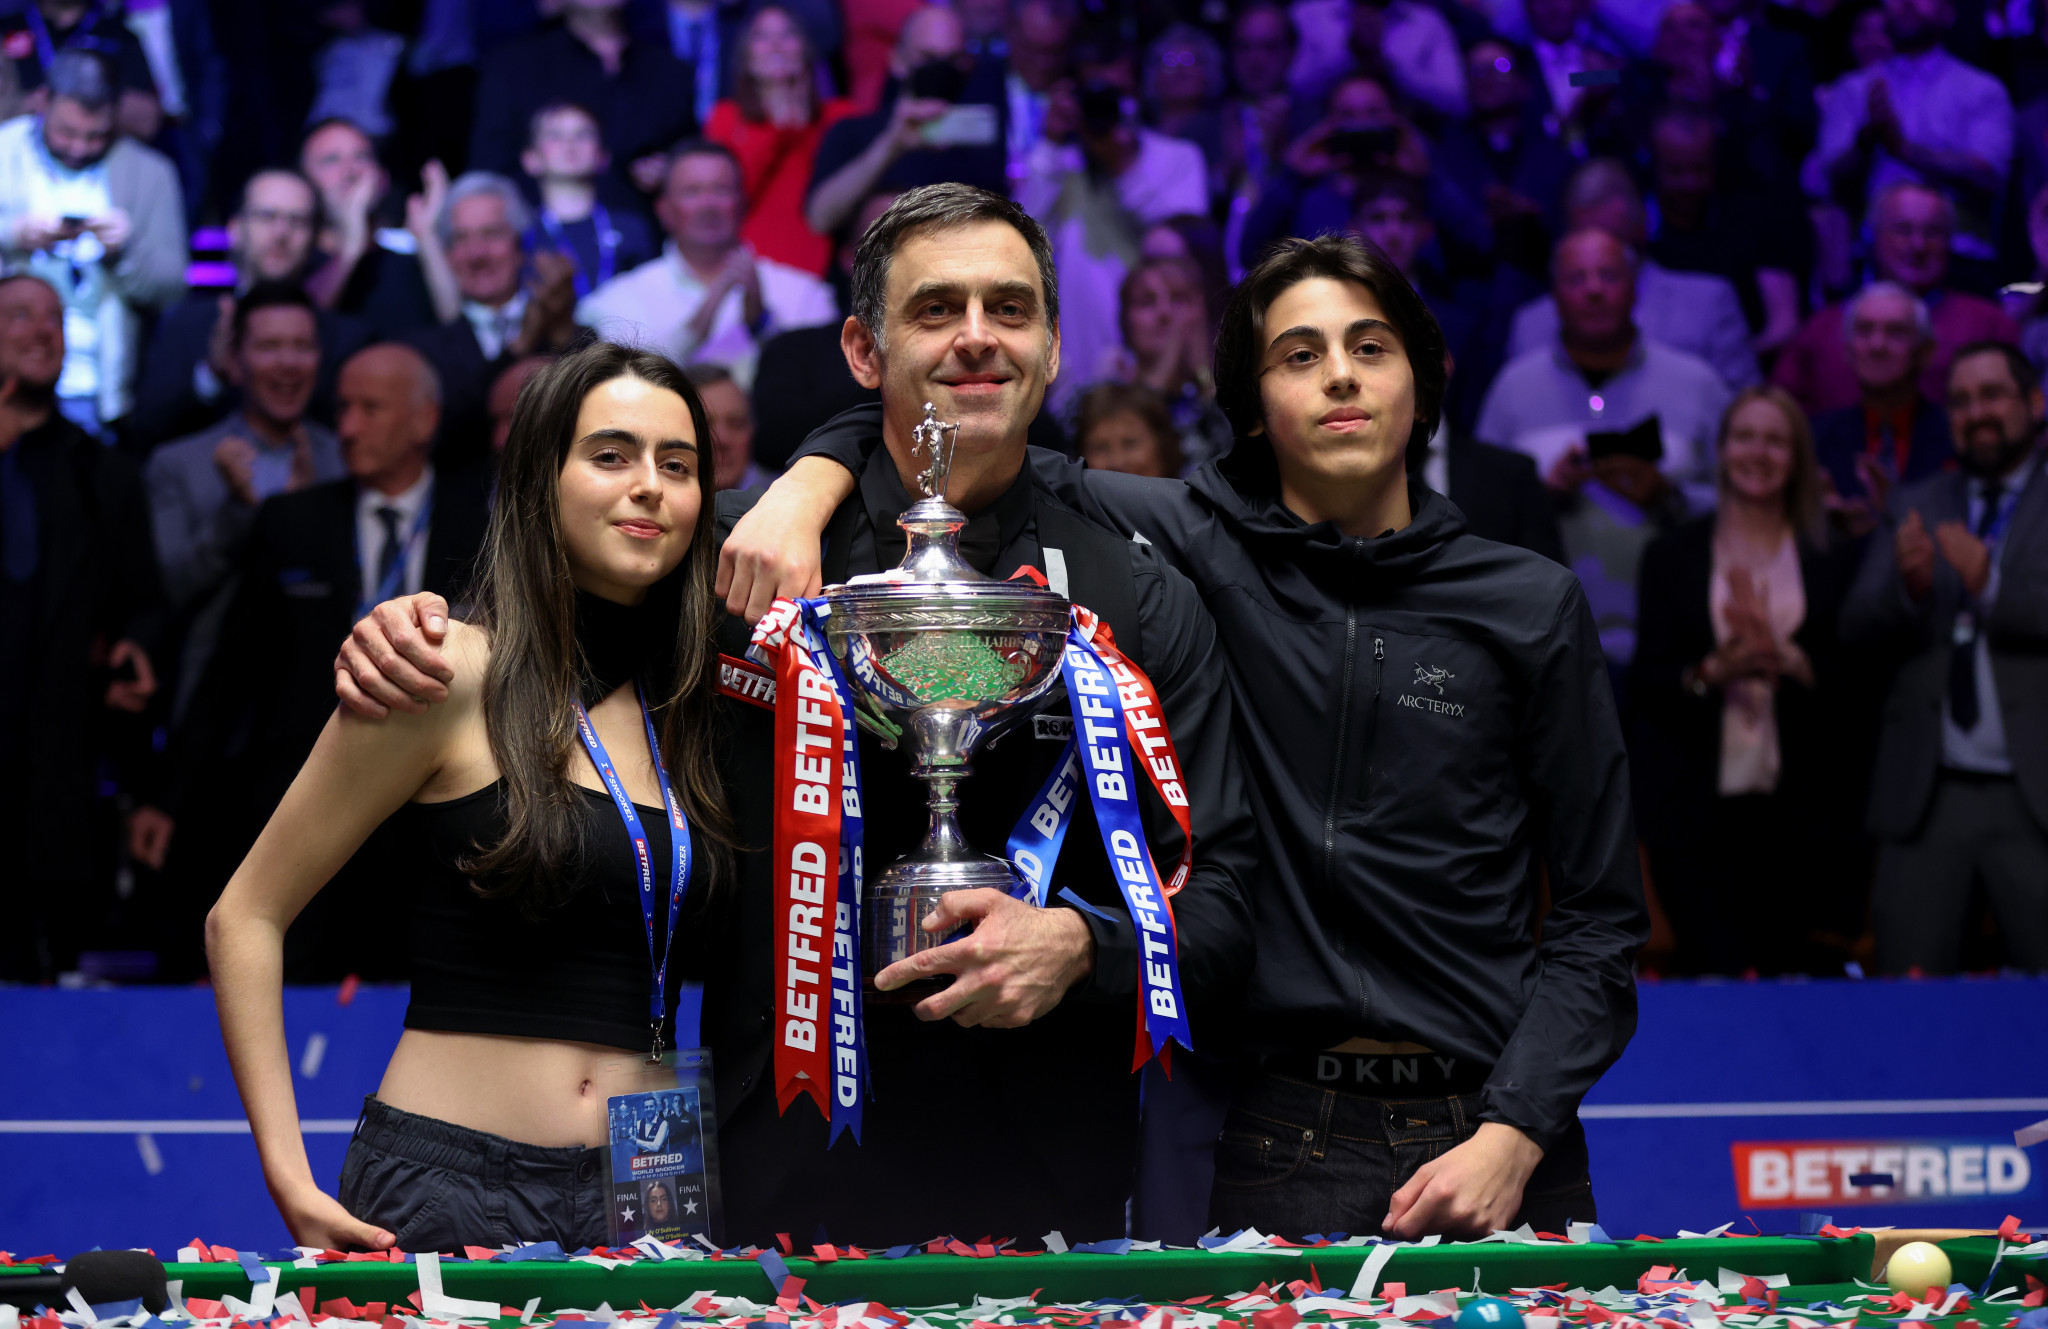 O’Sullivan claims record-equalling seventh World Snooker Championship with victory over Trump